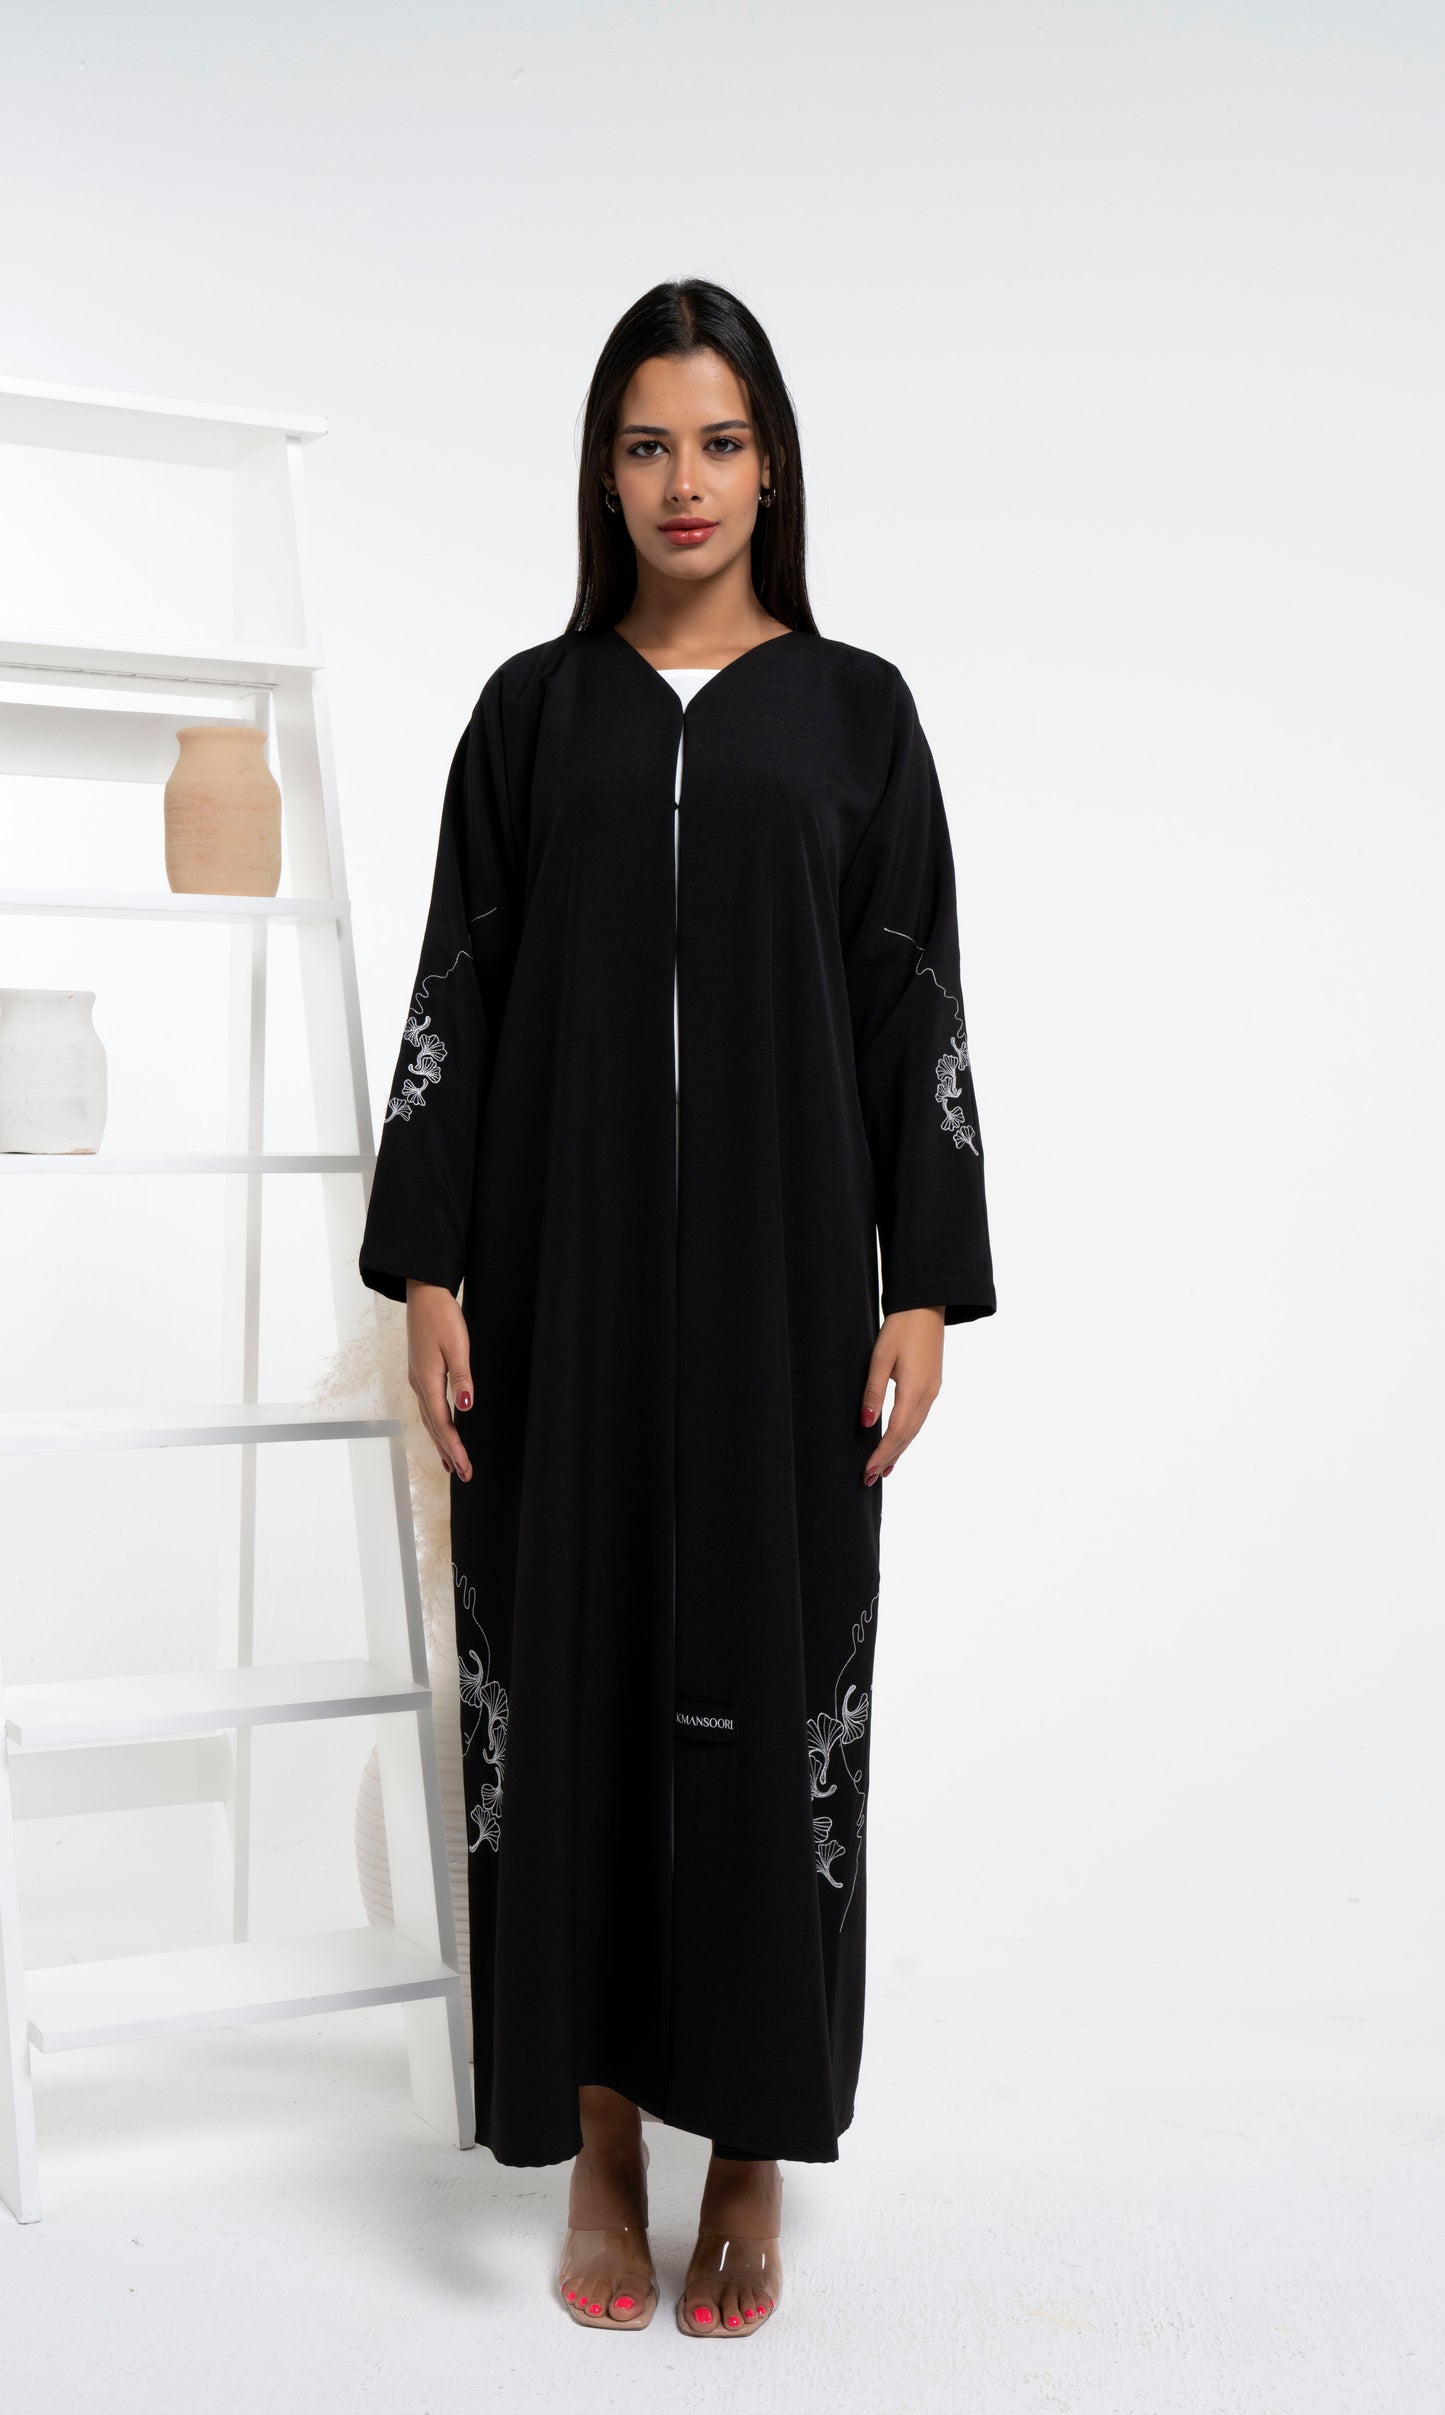 Black abaya for women with white floral embroidery